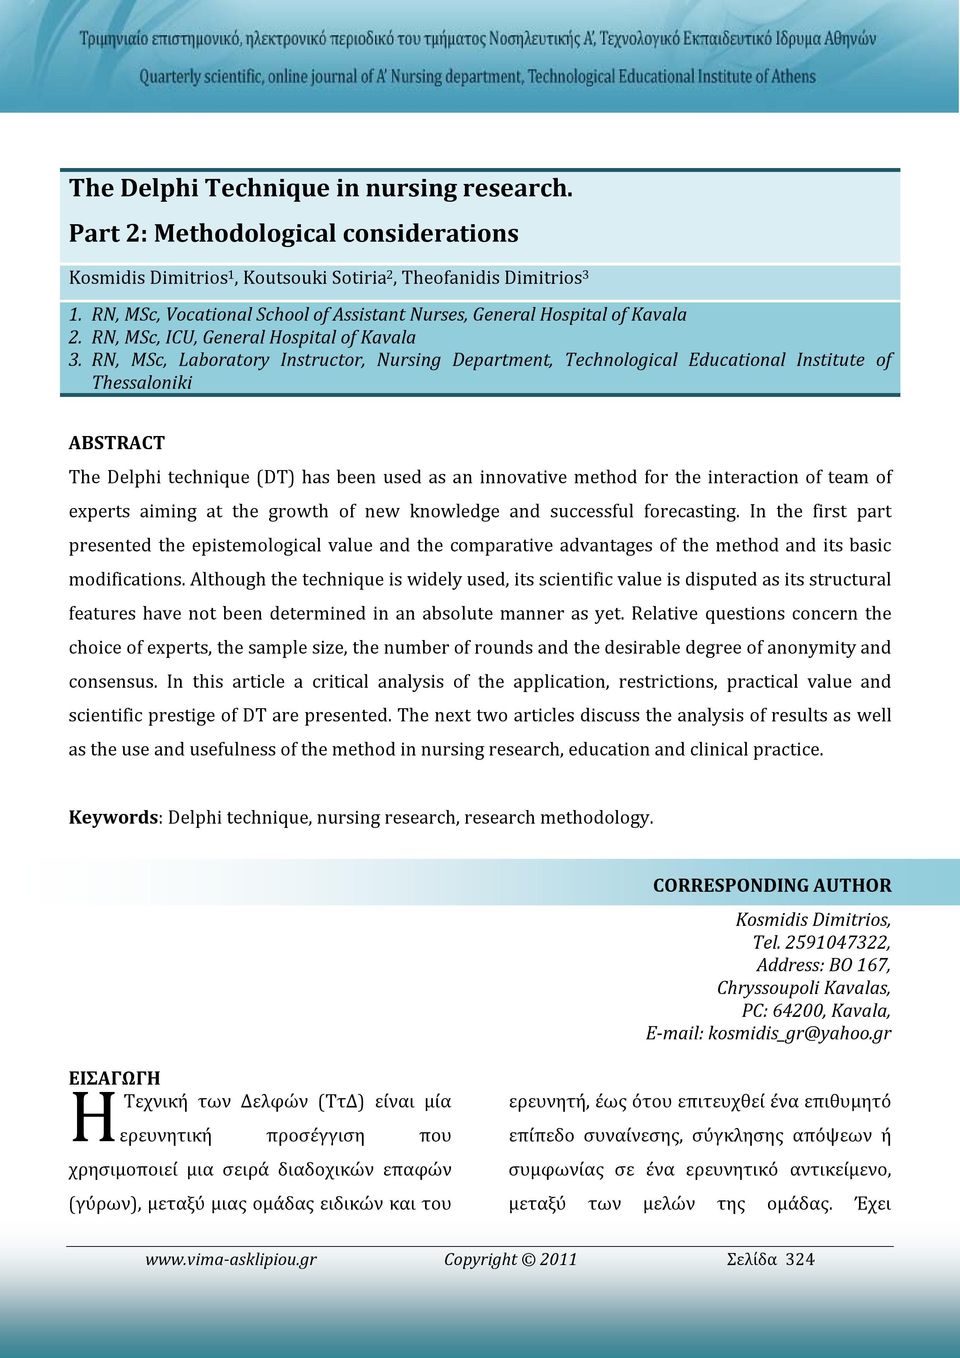 RN, MSc, Laboratory Instructor, Nursing Department, Technological Educational Institute of Thessaloniki ABSTRACT The Delphi technique (DT) has been used as an innovative method for the interaction of